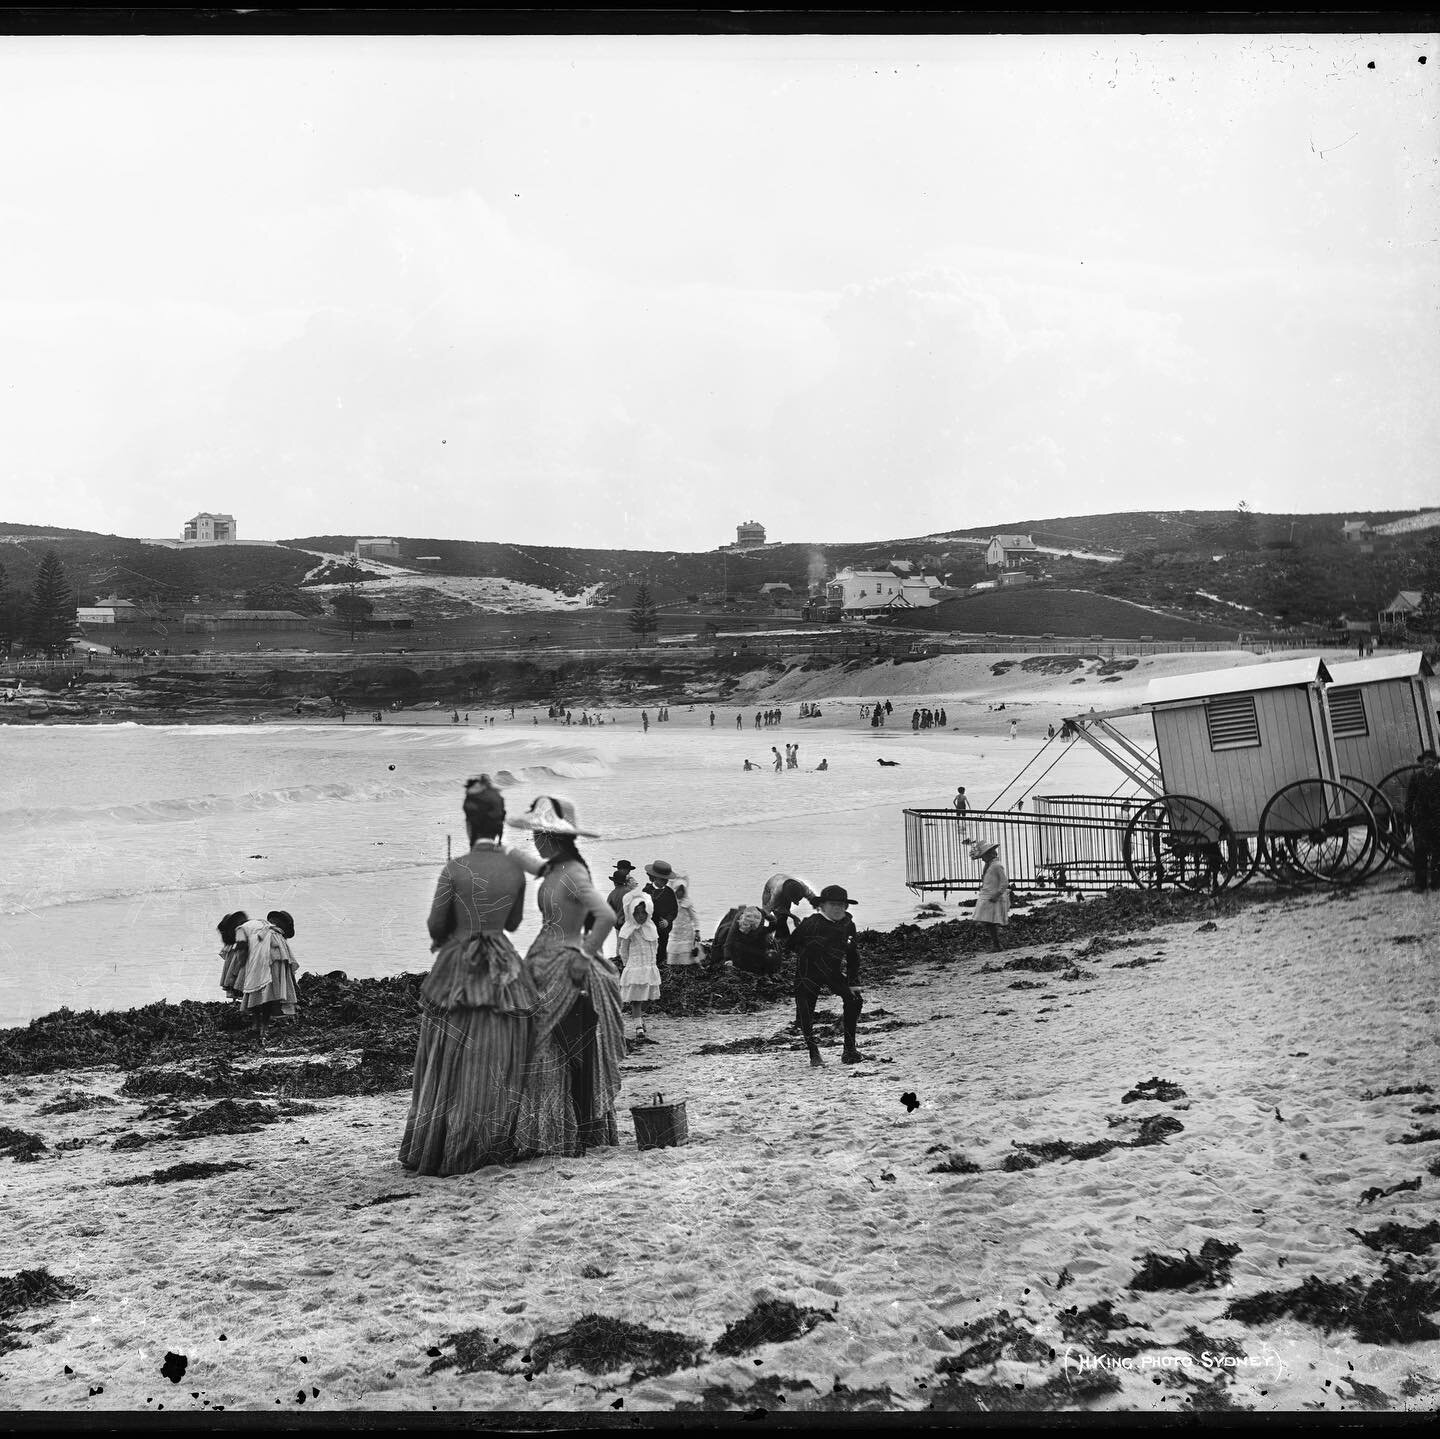 Bathing machines, bustles, bonnets, baskets and a breeze across the beach. A day at Coogee Bay, Sydney in the late 1880s. Glass plate negative, Henry King. Museum of Applied Arts and Sciences, 85/1285-345. 
#historicsydney #oldsydney #nineteenthcentu